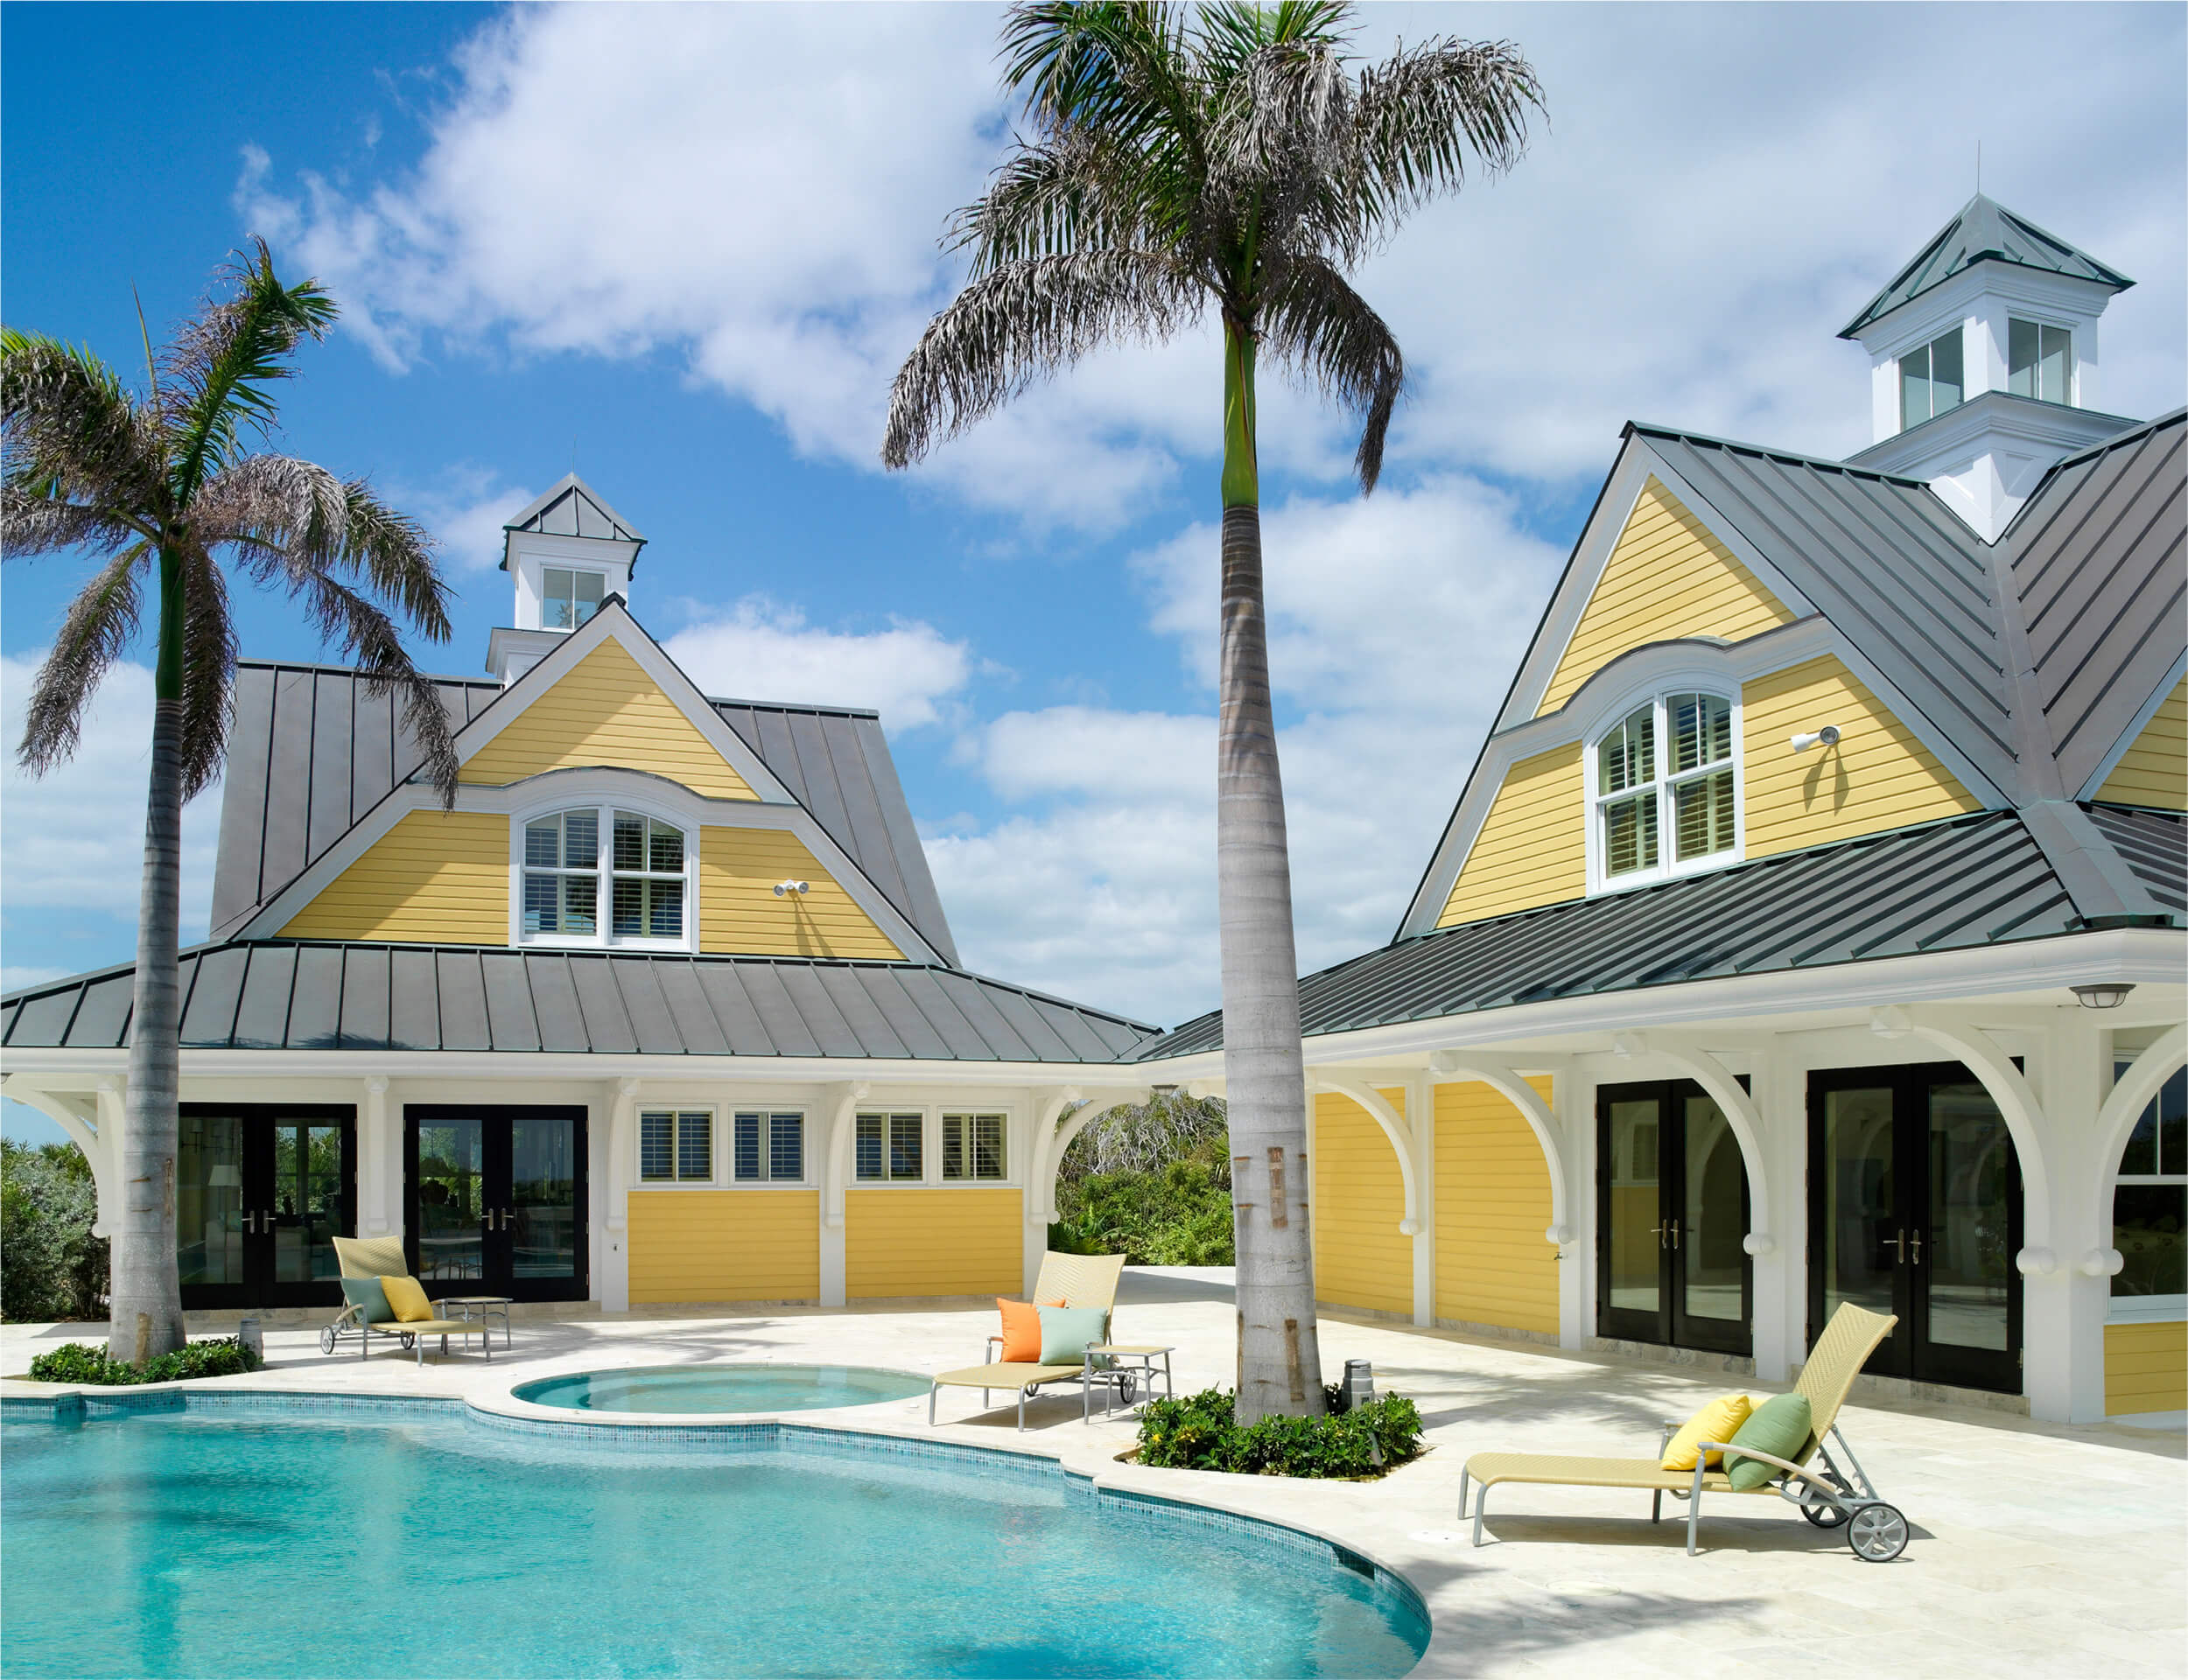 Elegant yellow coastal villa with a welcoming pool at The Abaco Club, reflecting the high-end club lifestyle in the serene environment of The Bahamas.